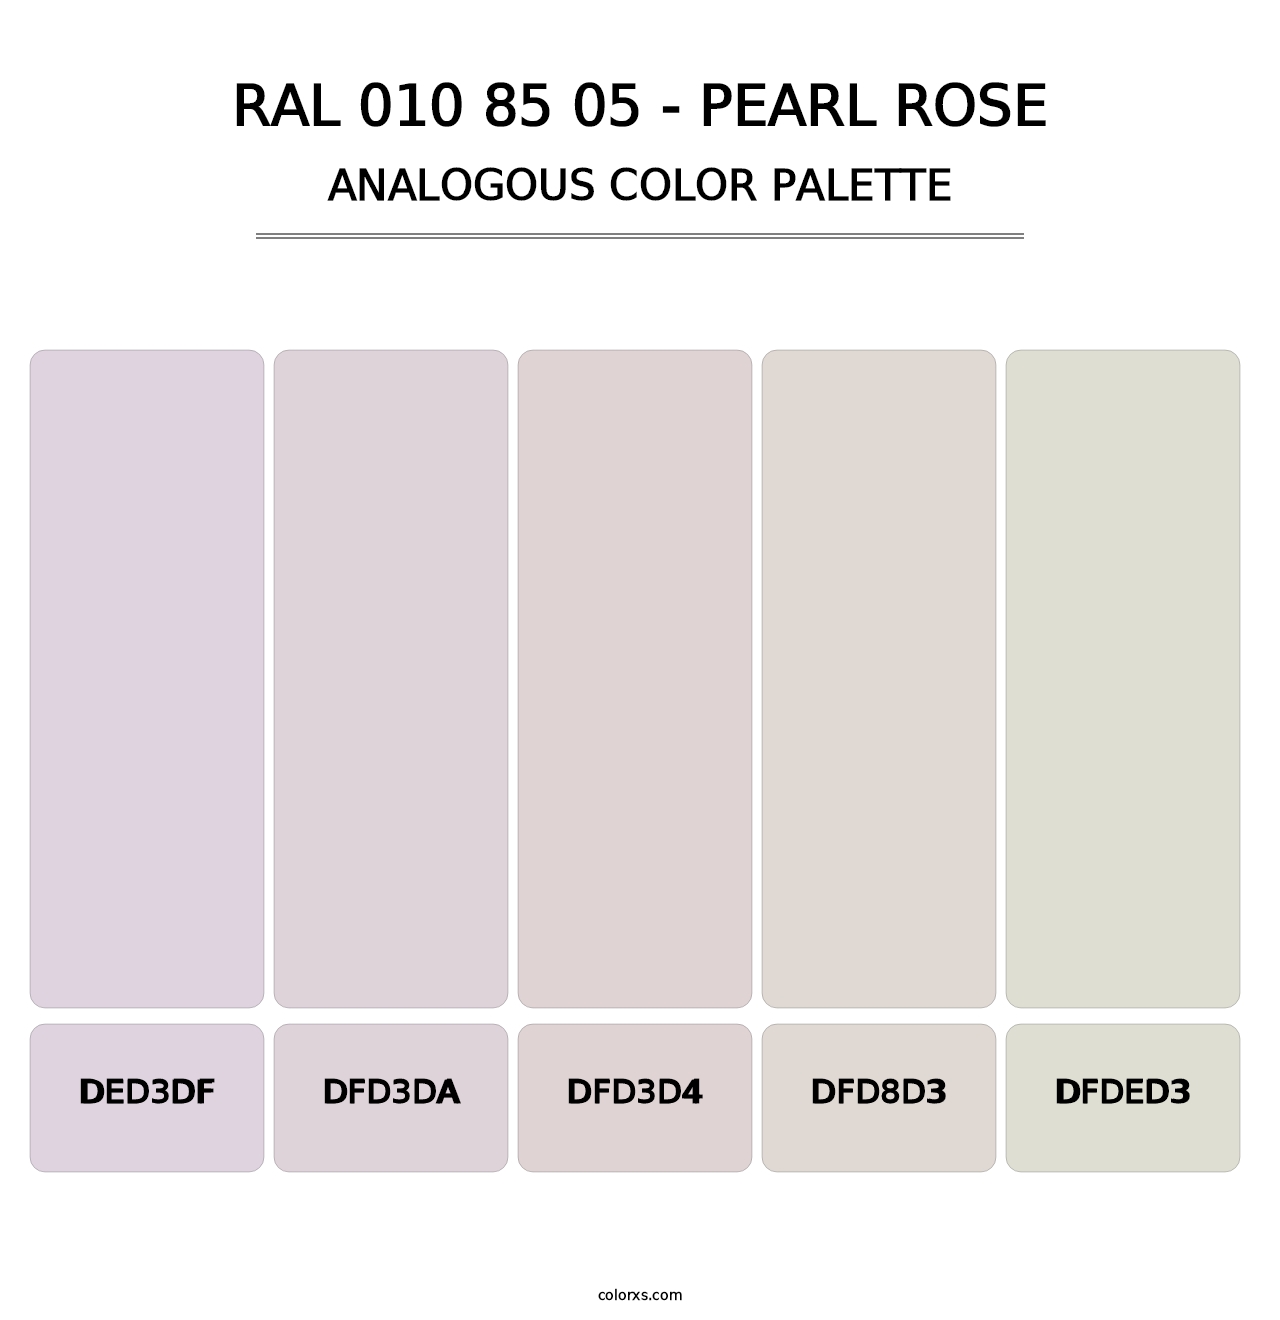 RAL 010 85 05 - Pearl Rose - Analogous Color Palette